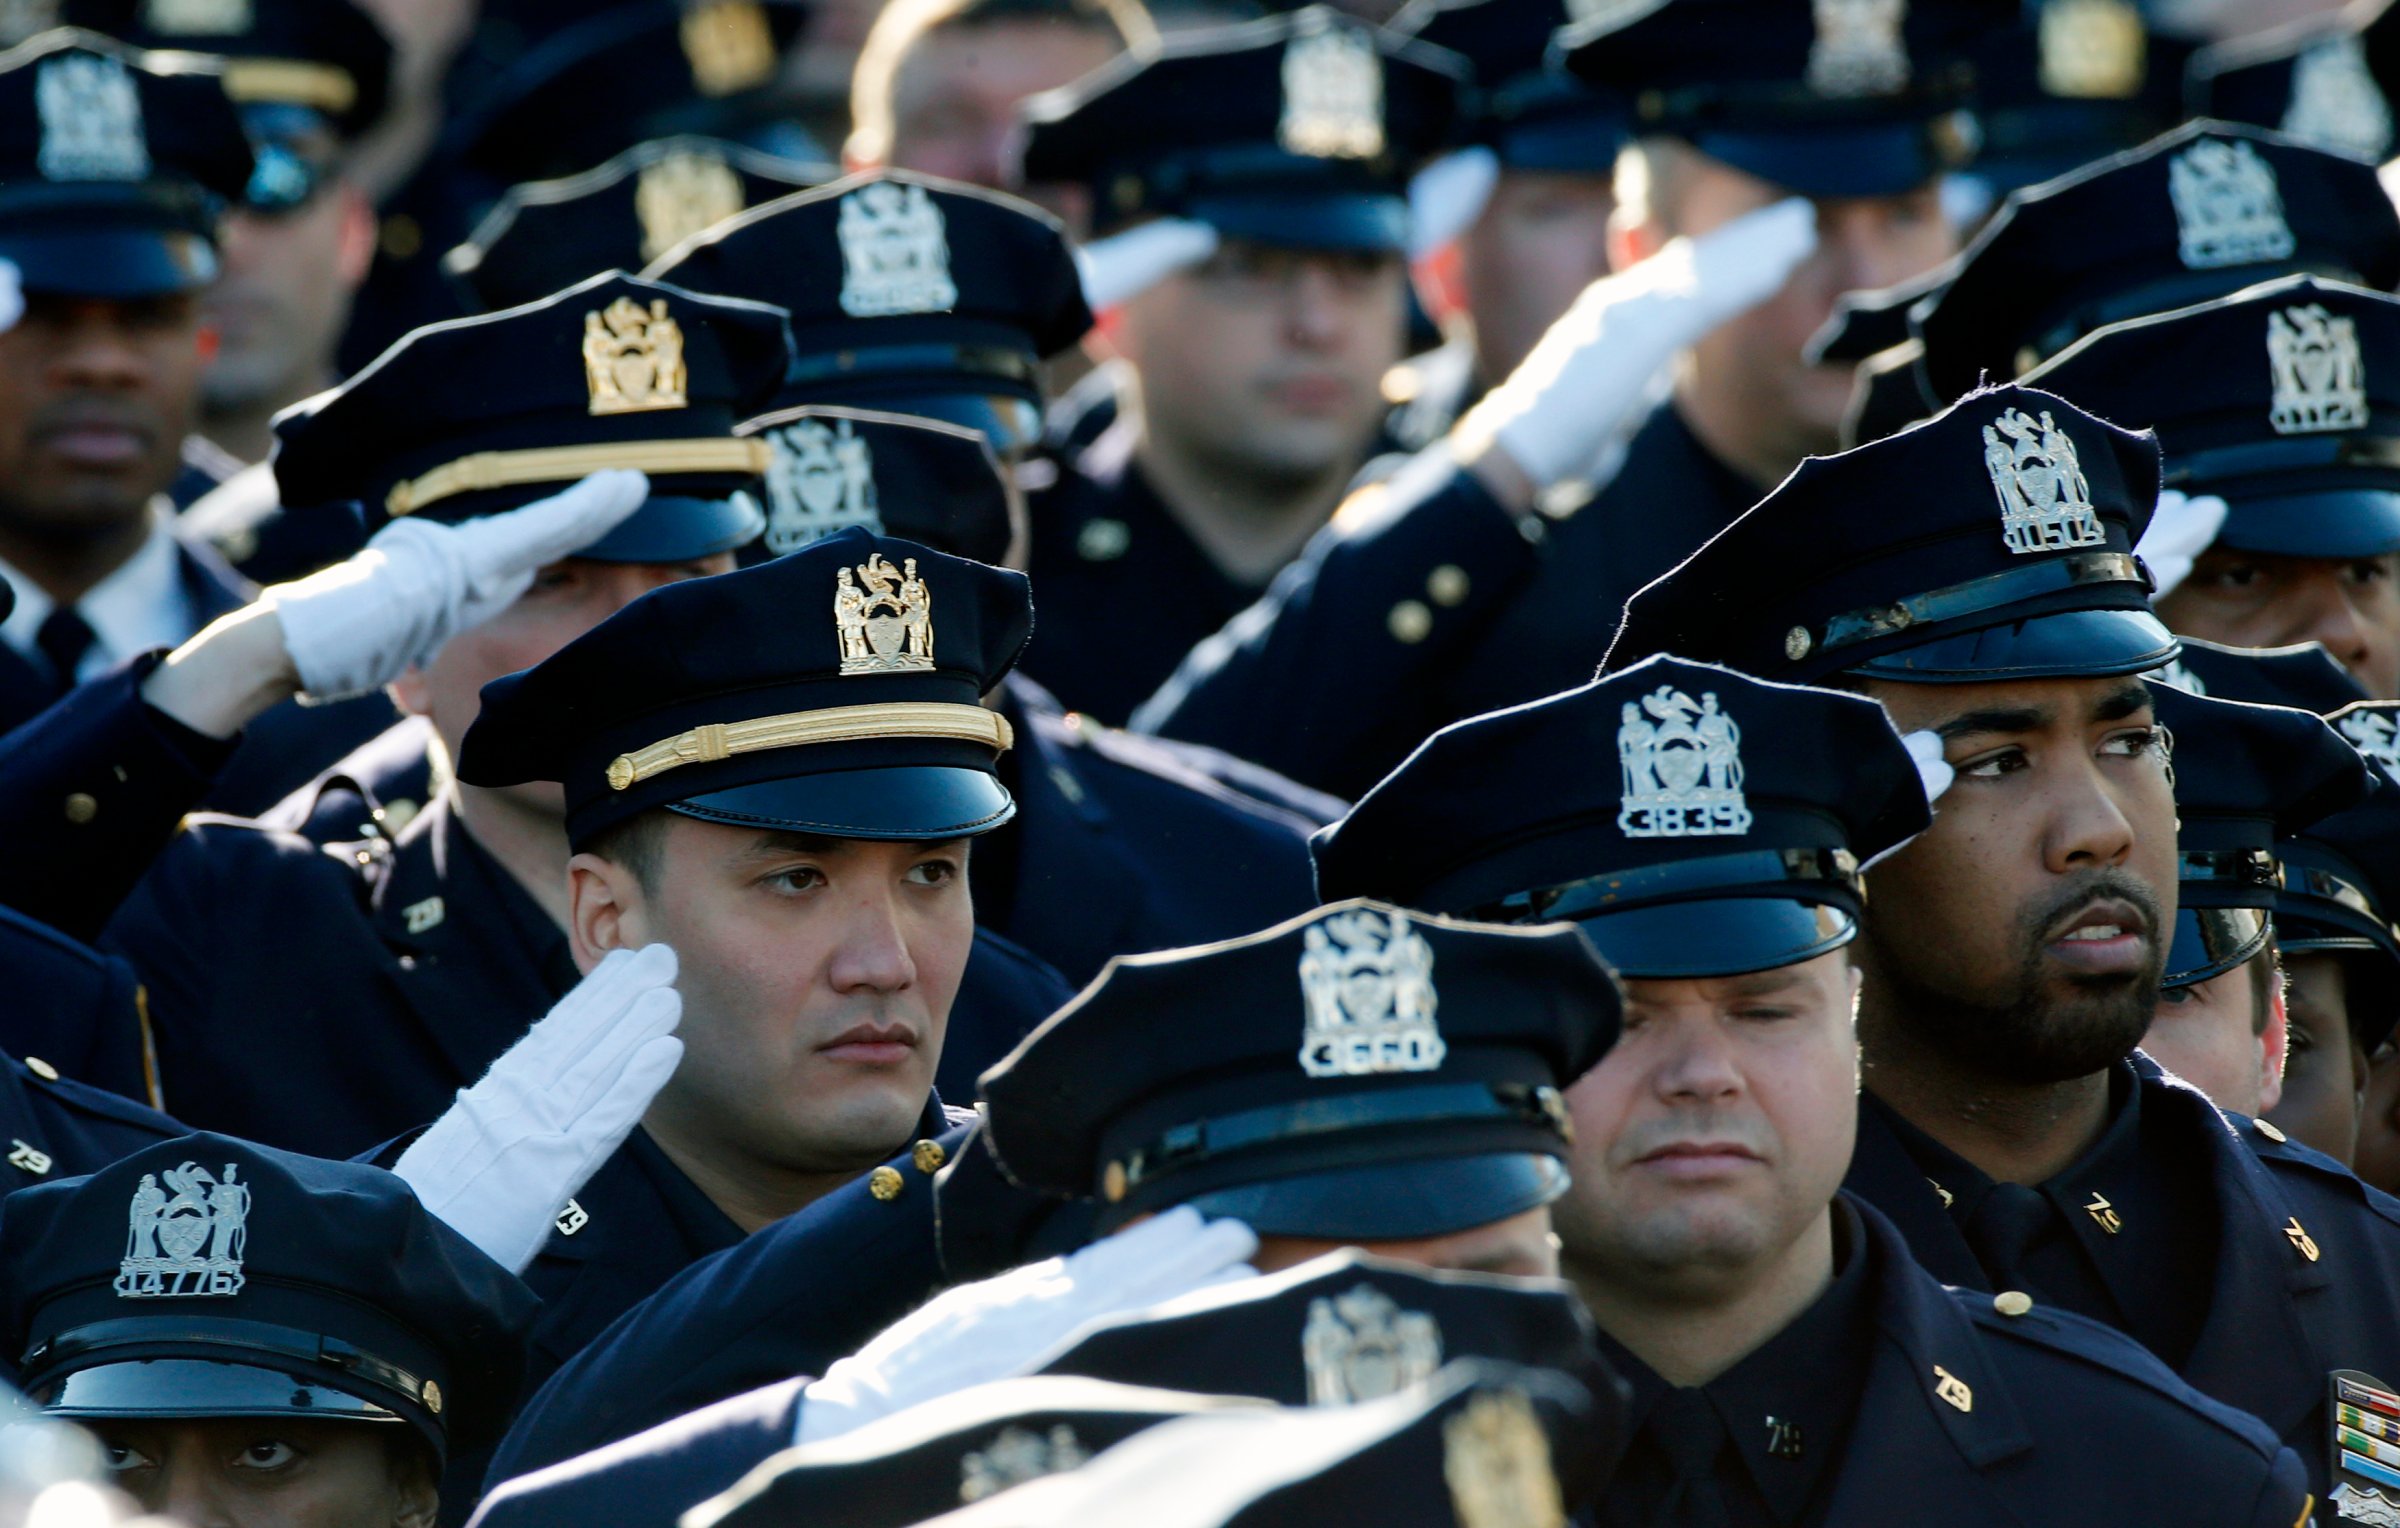 Police salute during the playing of the U.S. National Anthem outside the Christ Tabernacle Church at the start of the funeral service for slain NYPD officer Ramos in the Queens borough of New York